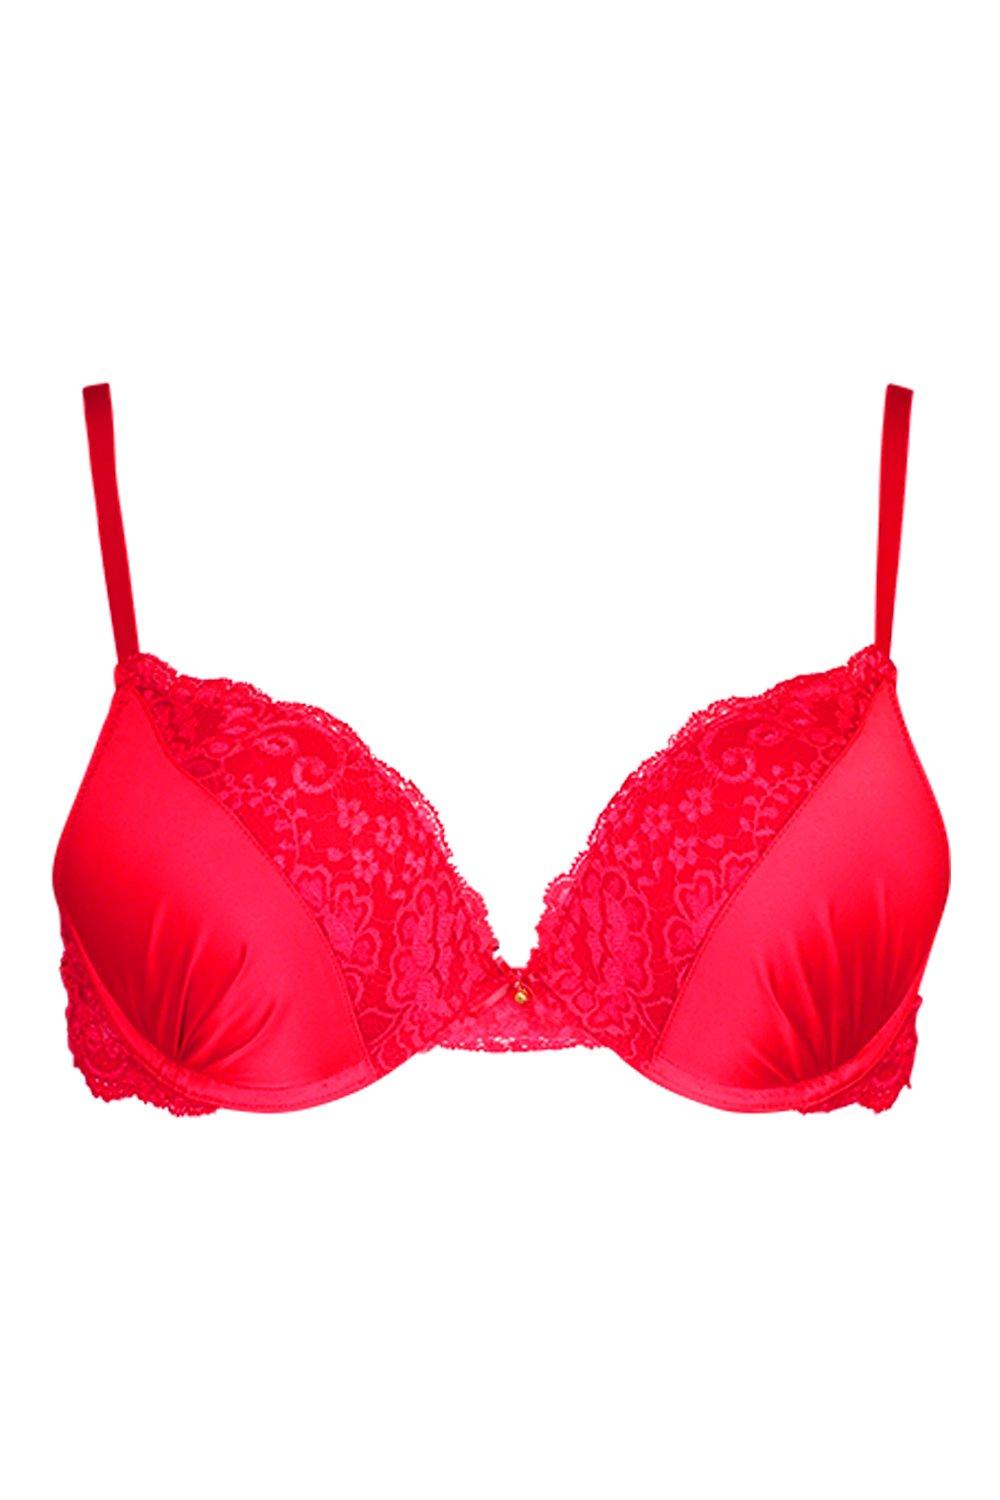 cheap price on sale site 32B Bombshell Miraculous Red Lace Strapless Bra  PushUp Lace Satin Rare